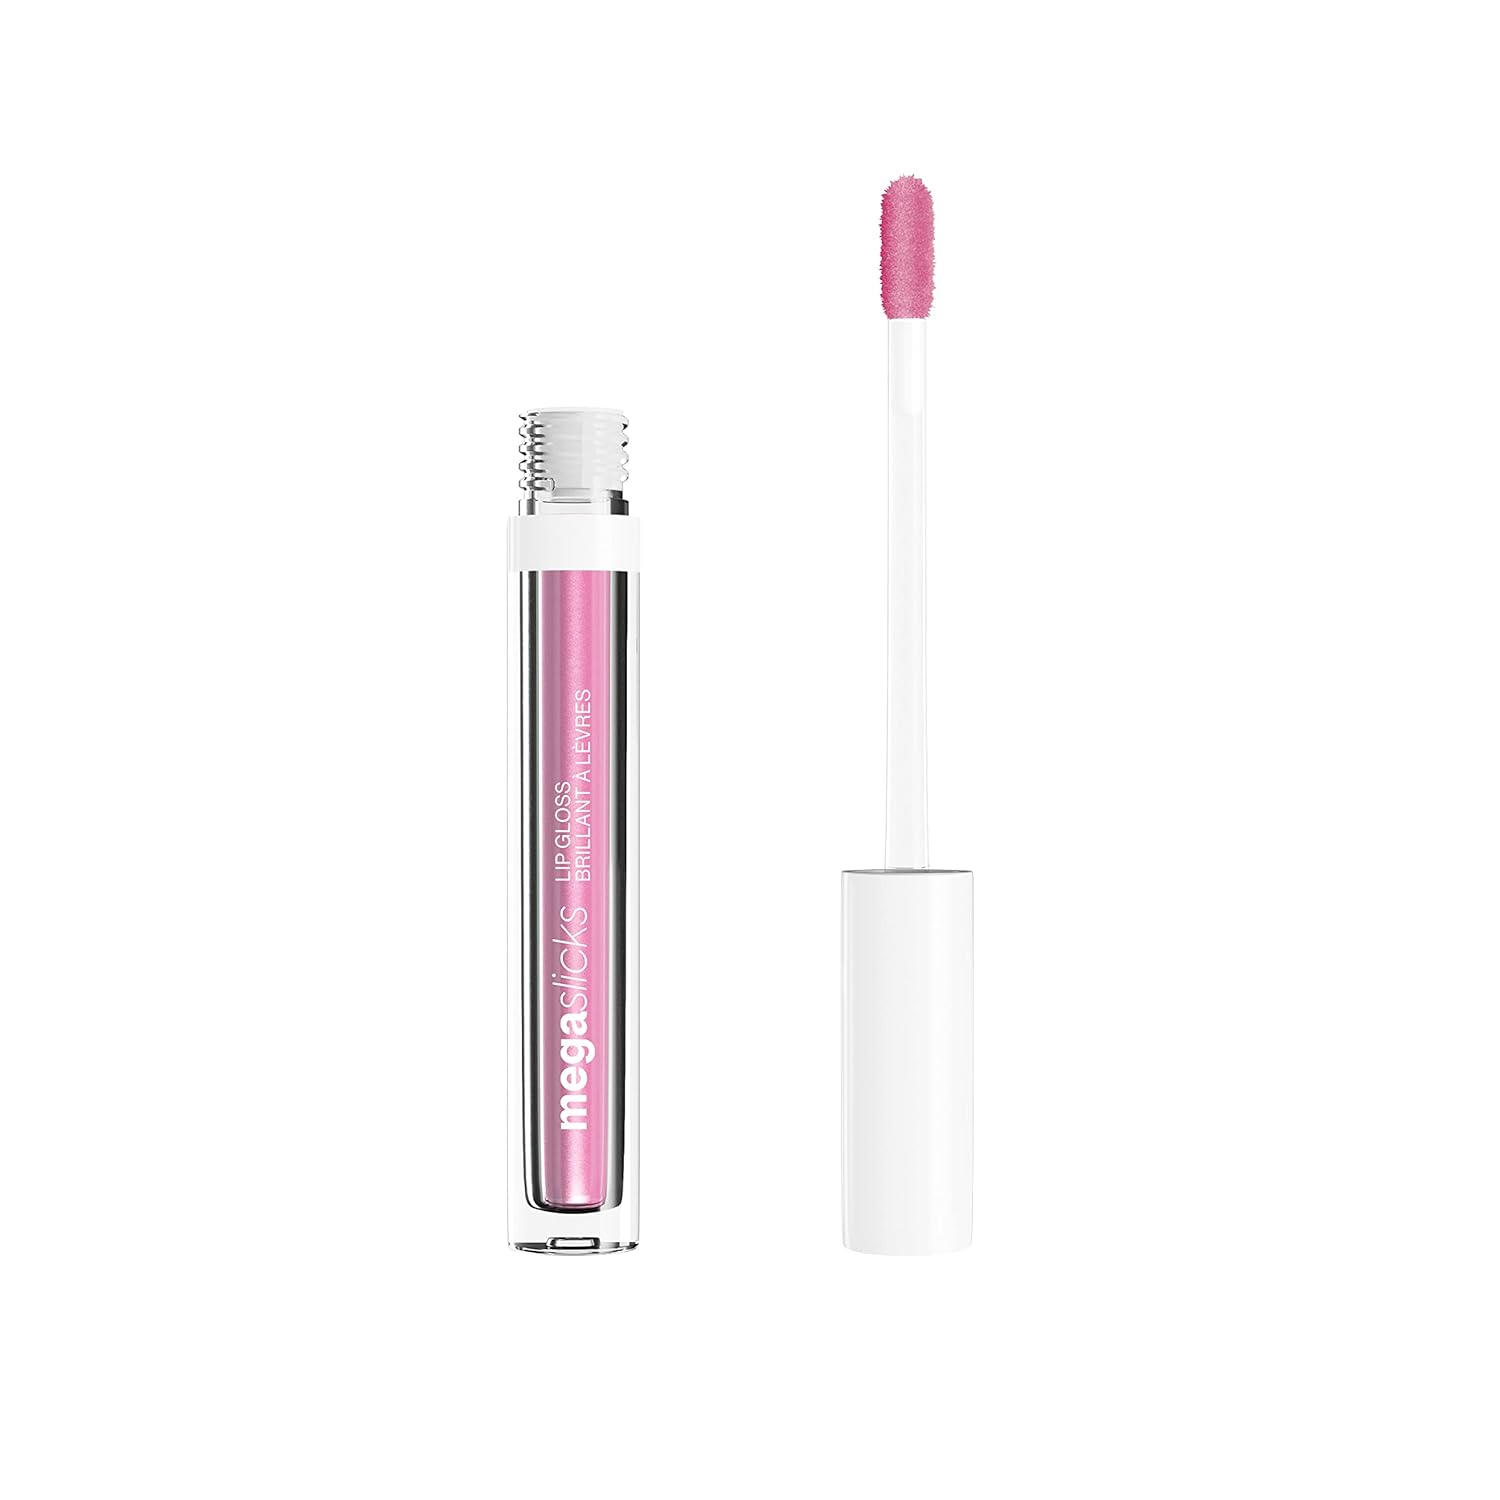 Wet \ 'n \' Wild, Mega Slicks Lip Gloss, extra shiny lipstick with a light and radiant texture for soft, full, healthy lips, formula with hyaluronic acid and vegan collagen, sinless